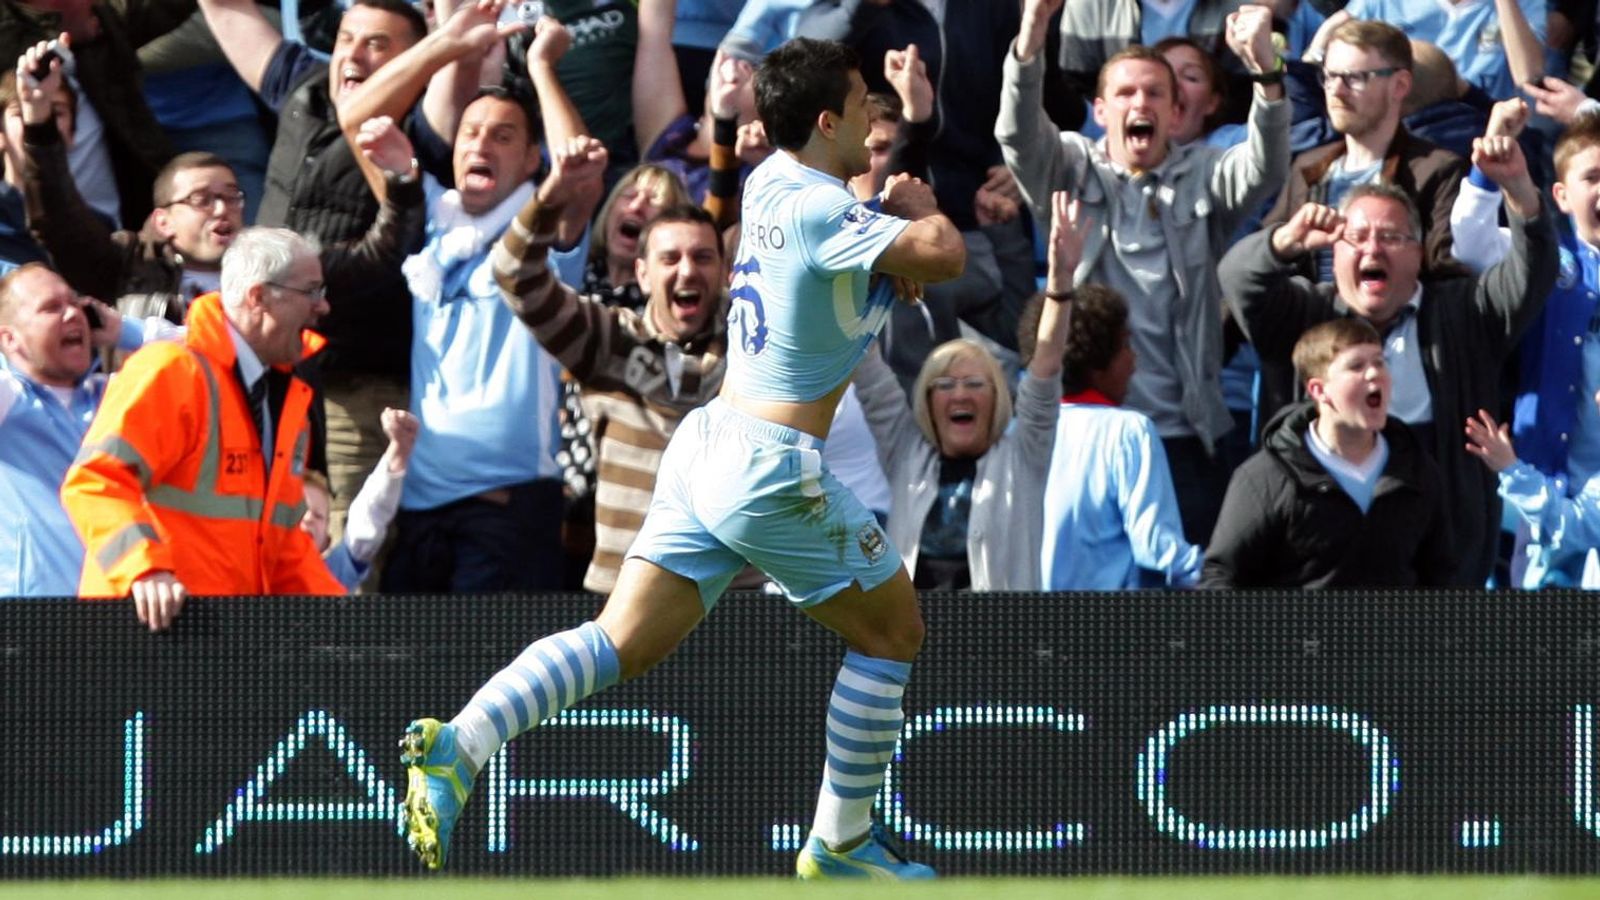 Shirt worn by Aguero when he scored famous title-winning goal for Manchester City up for sale